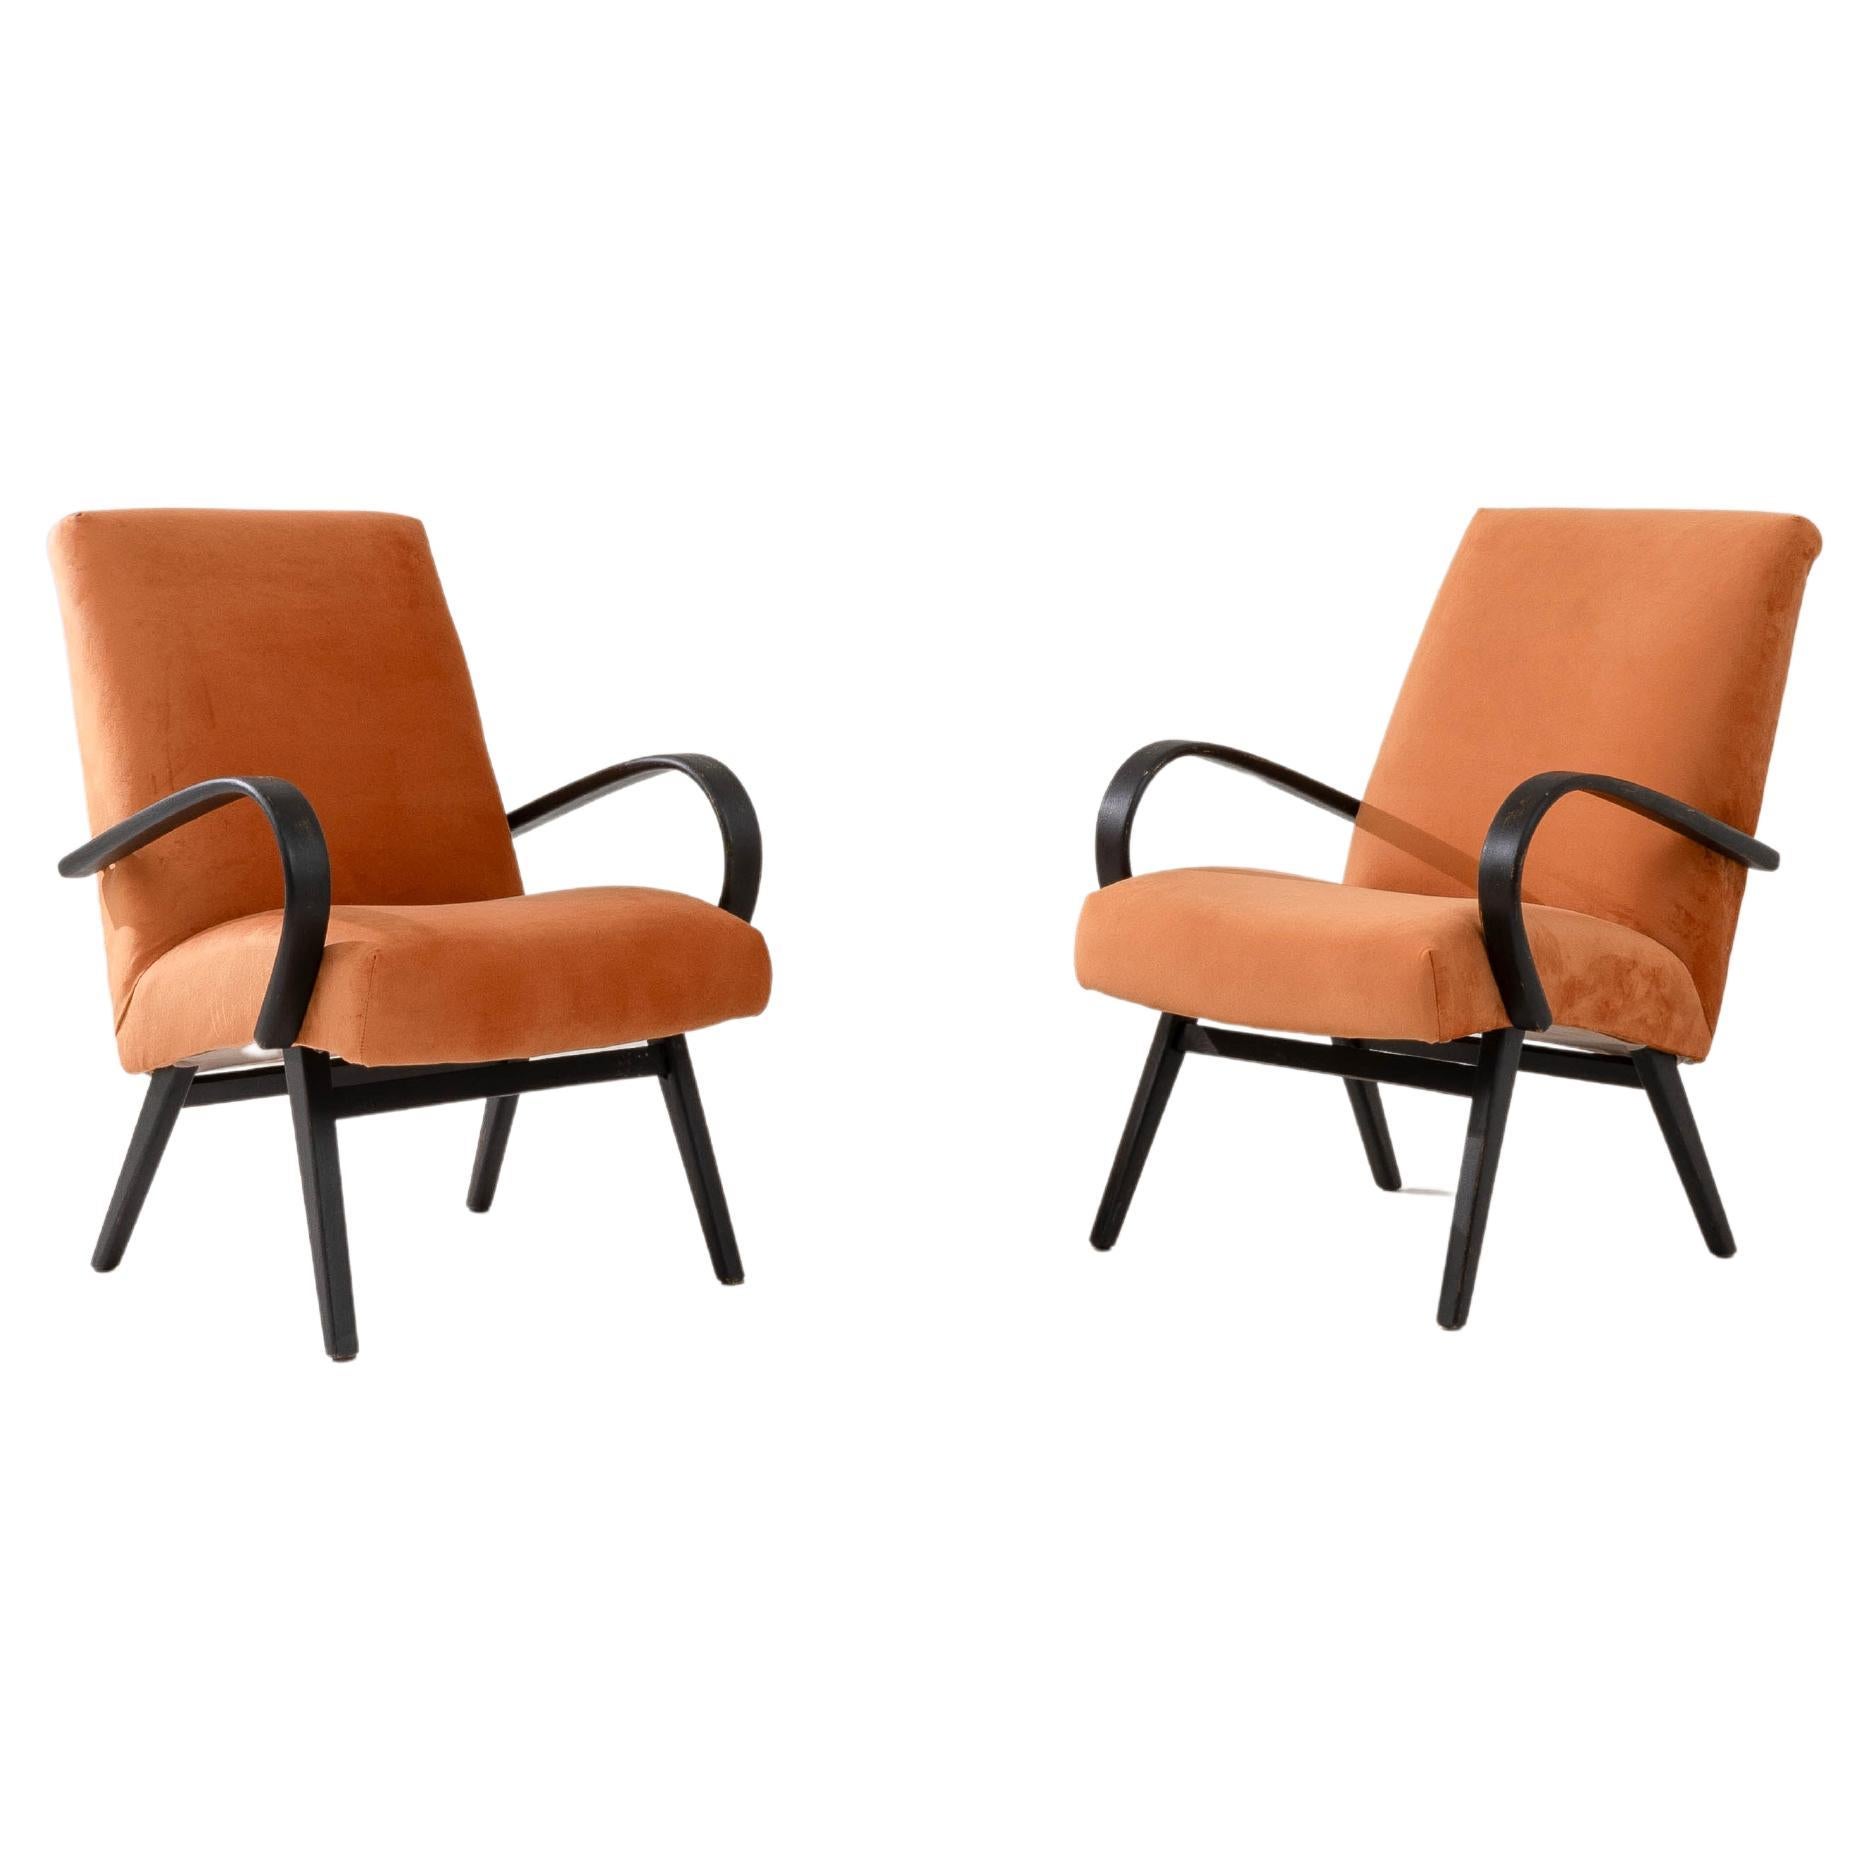 1950s Czech Upholstered Armchairs, a Pair For Sale